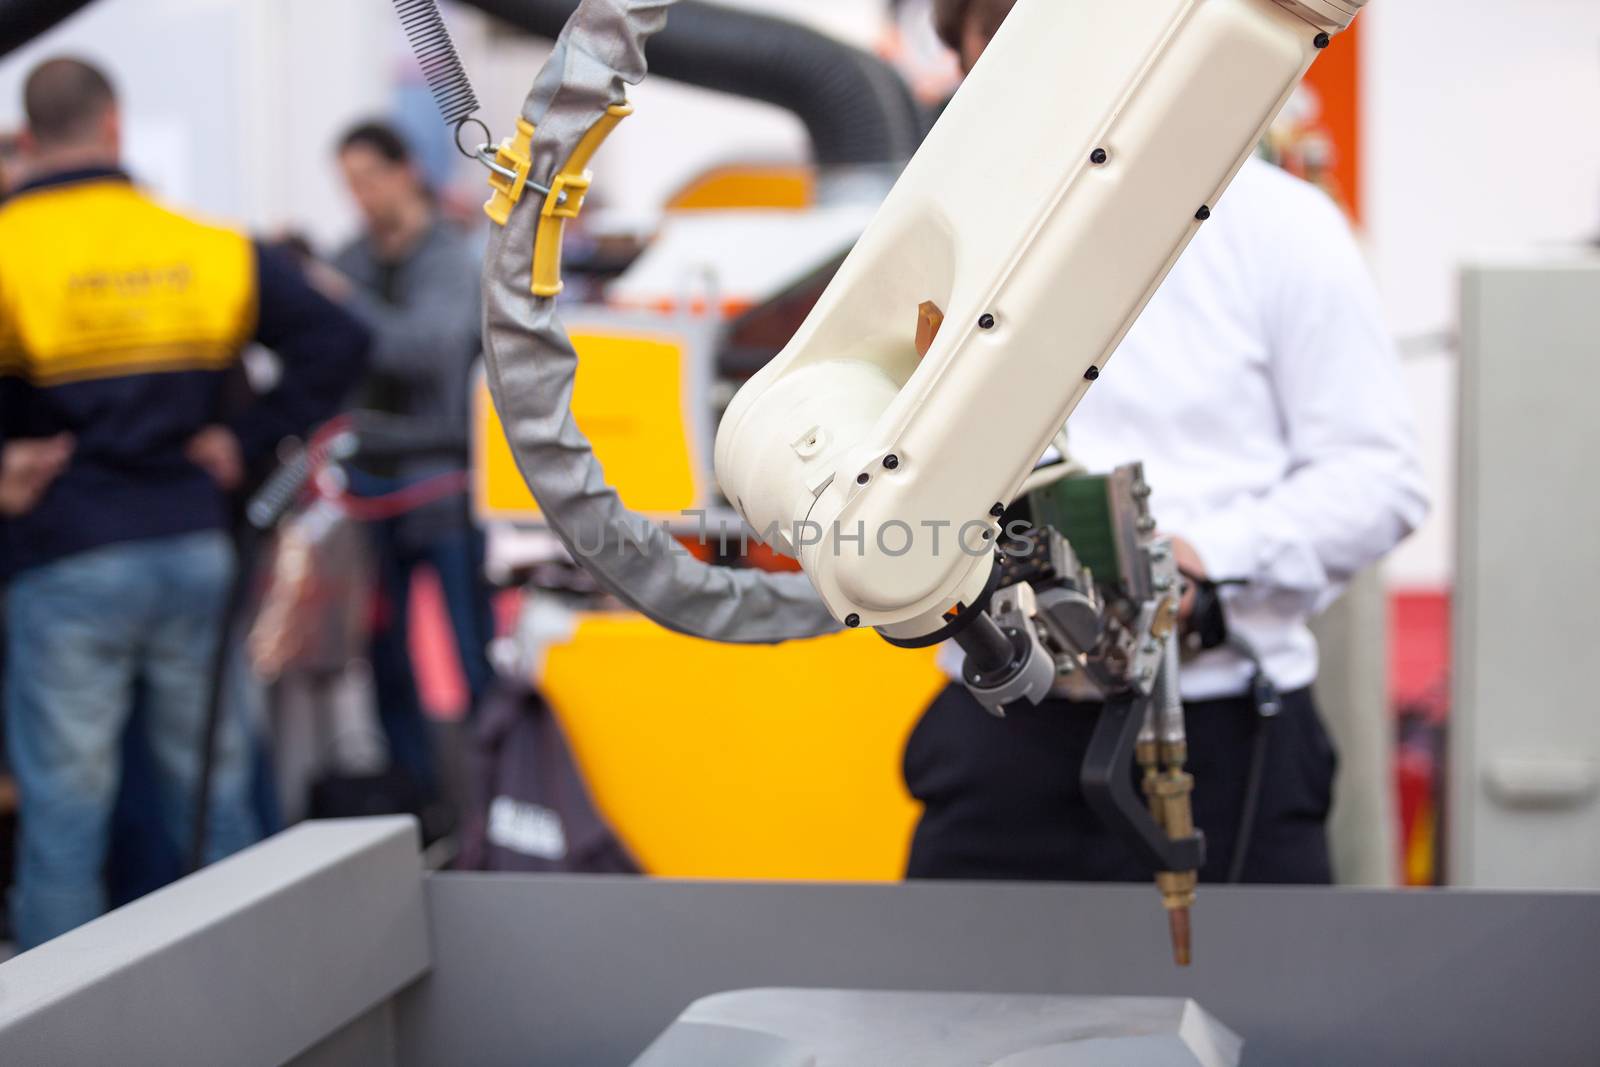 Industrial robot arm by wellphoto